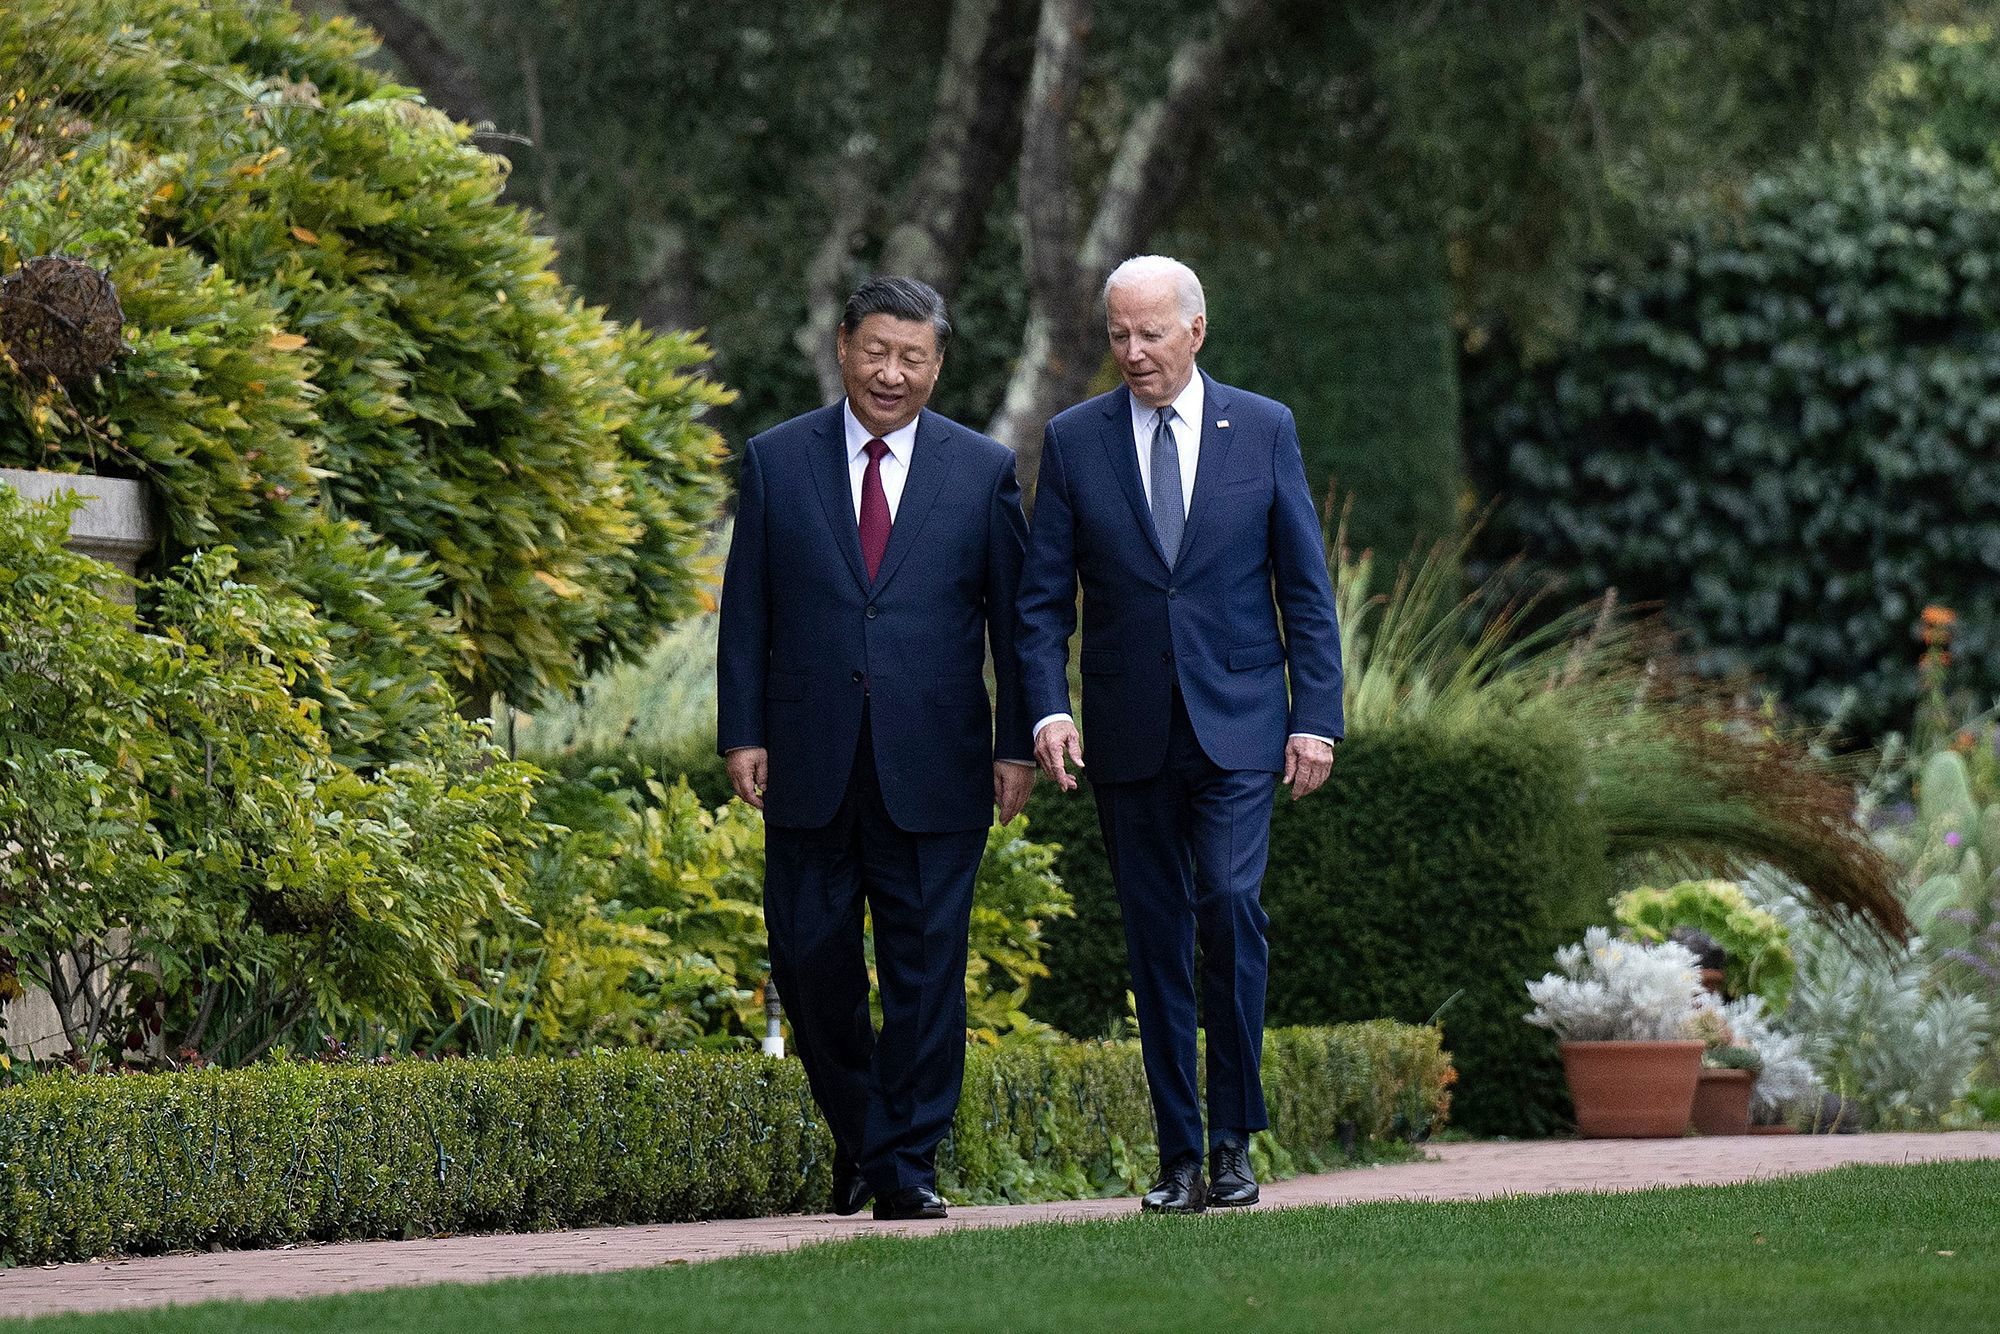 Biden and Xi speak for first time since November summit amid global tensions